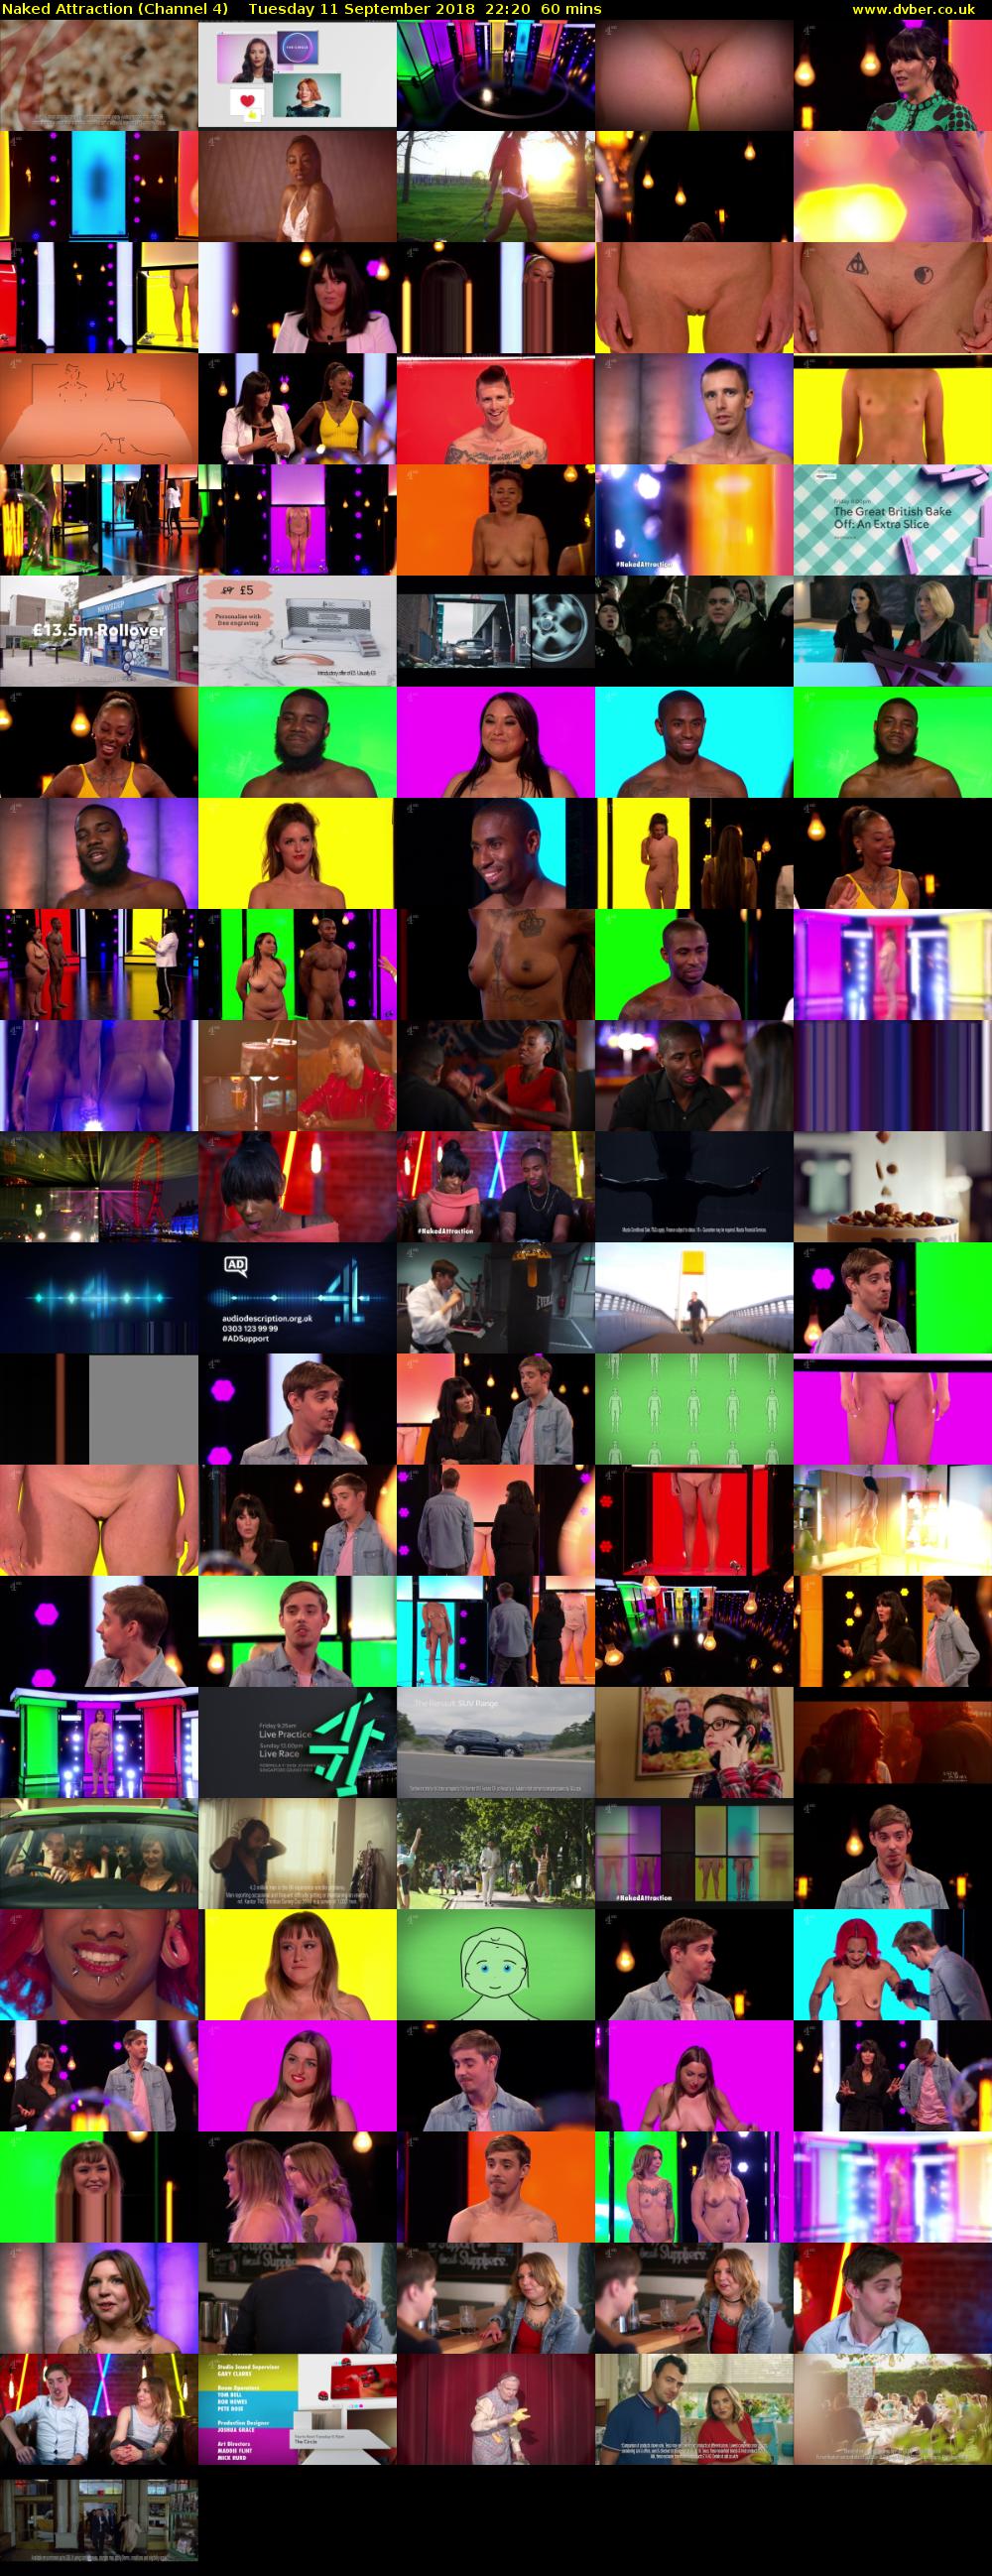 Naked Attraction (Channel 4) Tuesday 11 September 2018 22:20 - 23:20